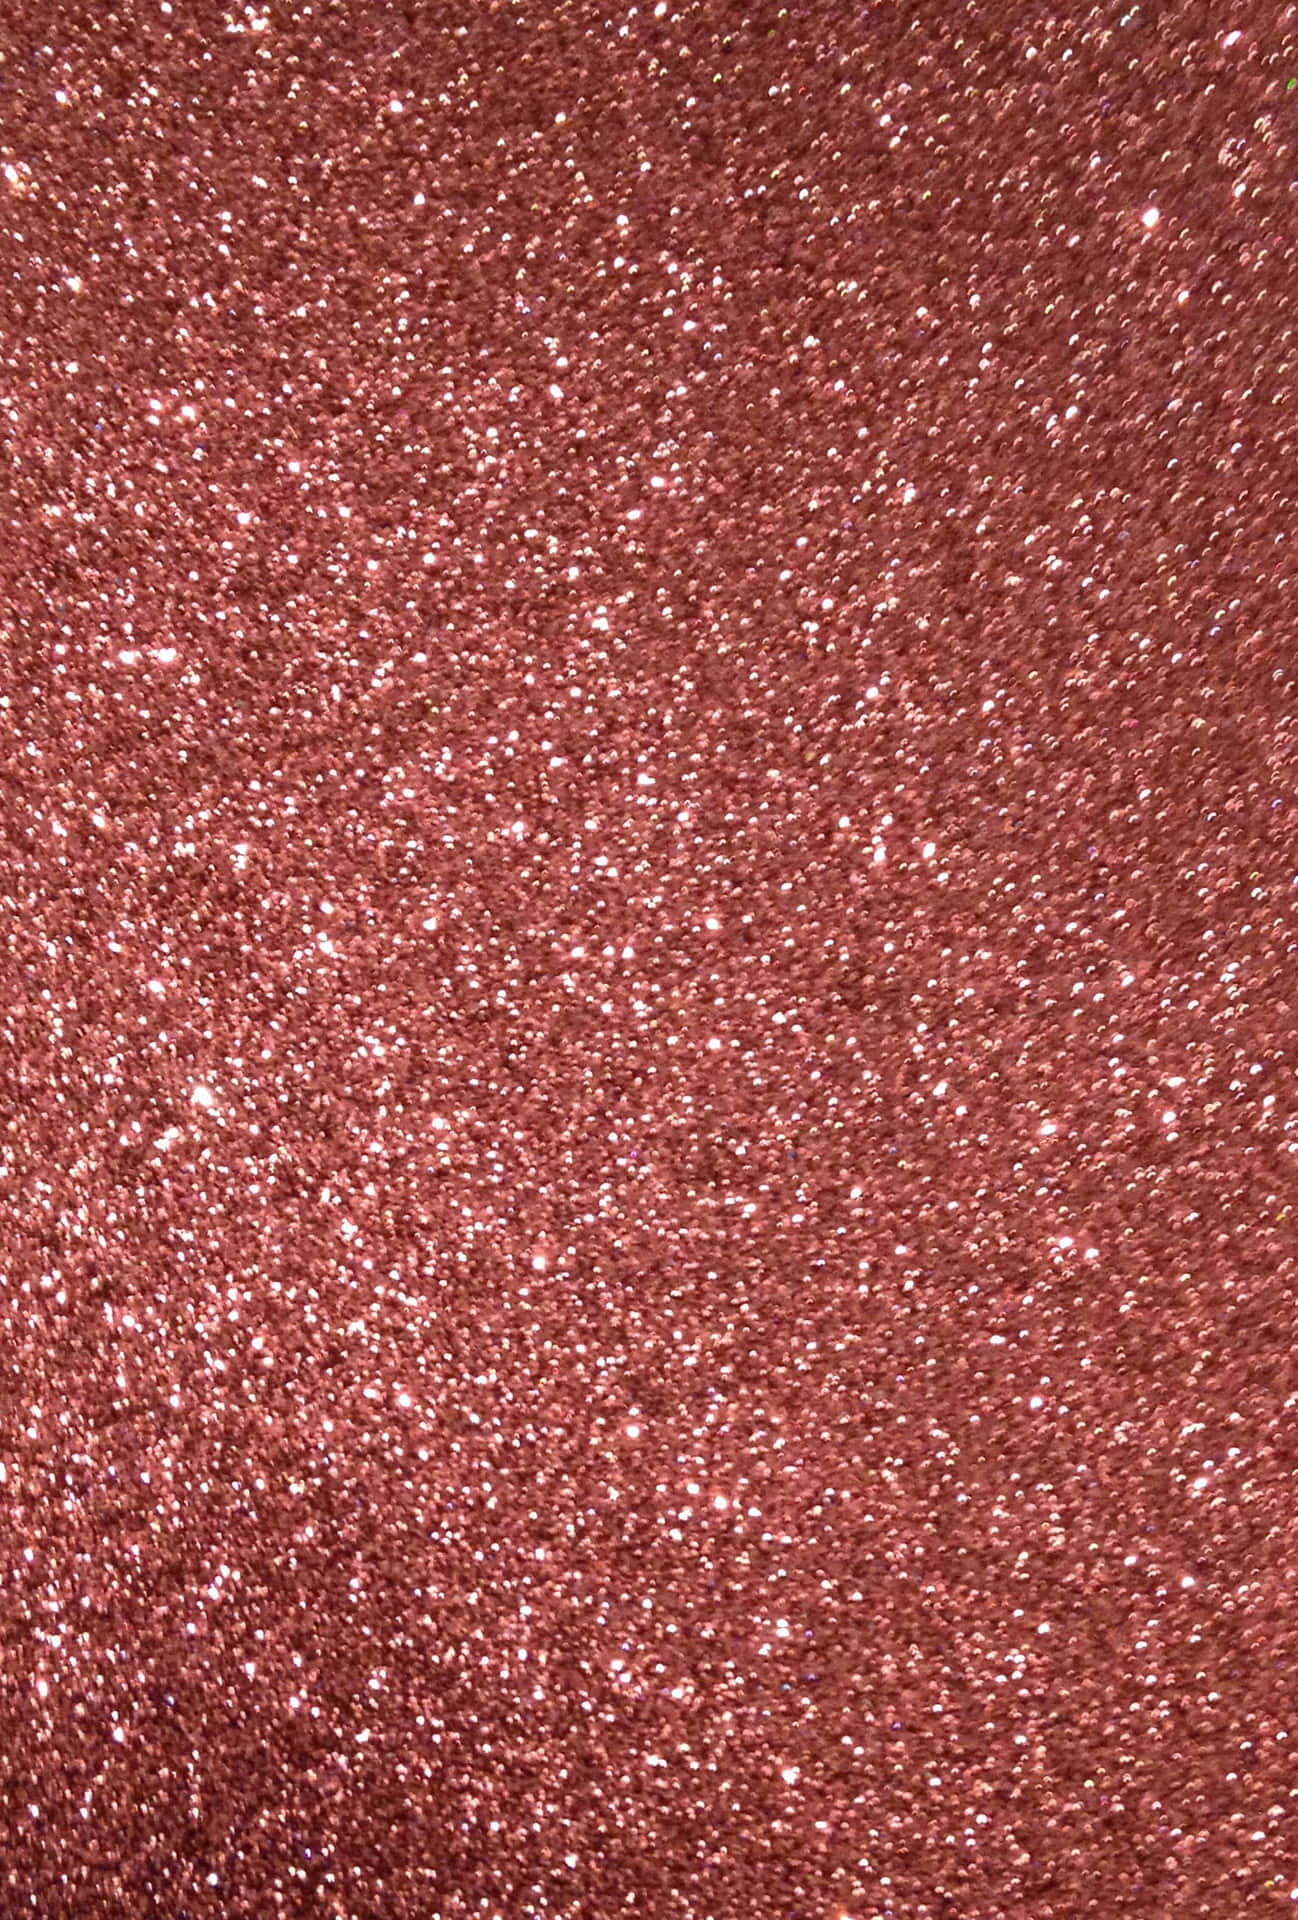 A Close Up Of A Red Glitter Background